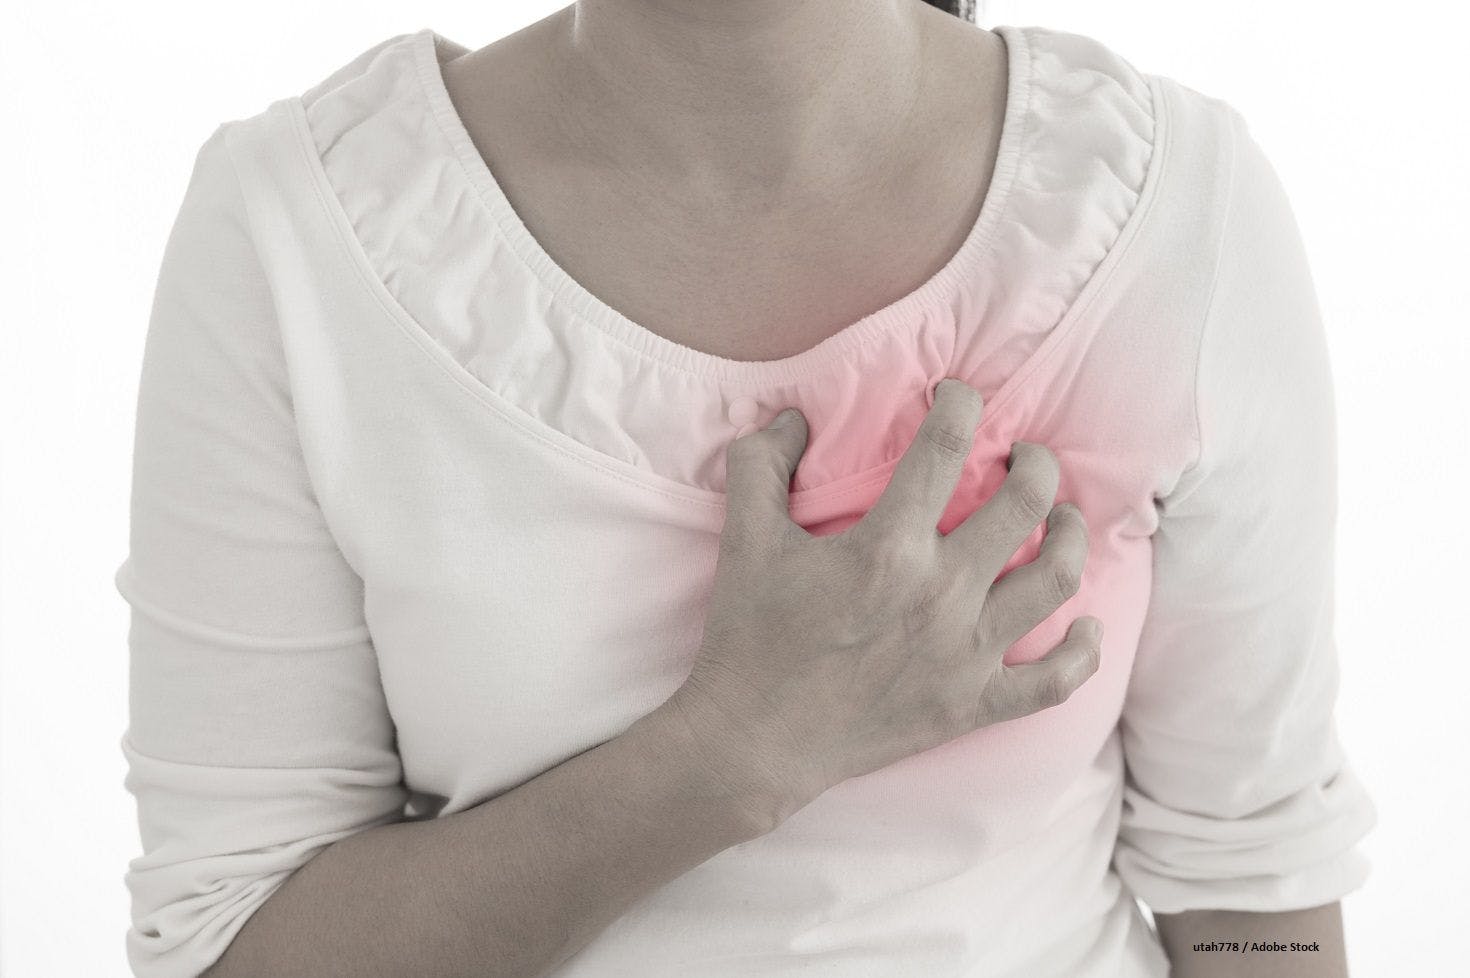 Alternative Chemo Formulations May Help Reduce Cardiac Toxicity in HER2+ Breast Cancer